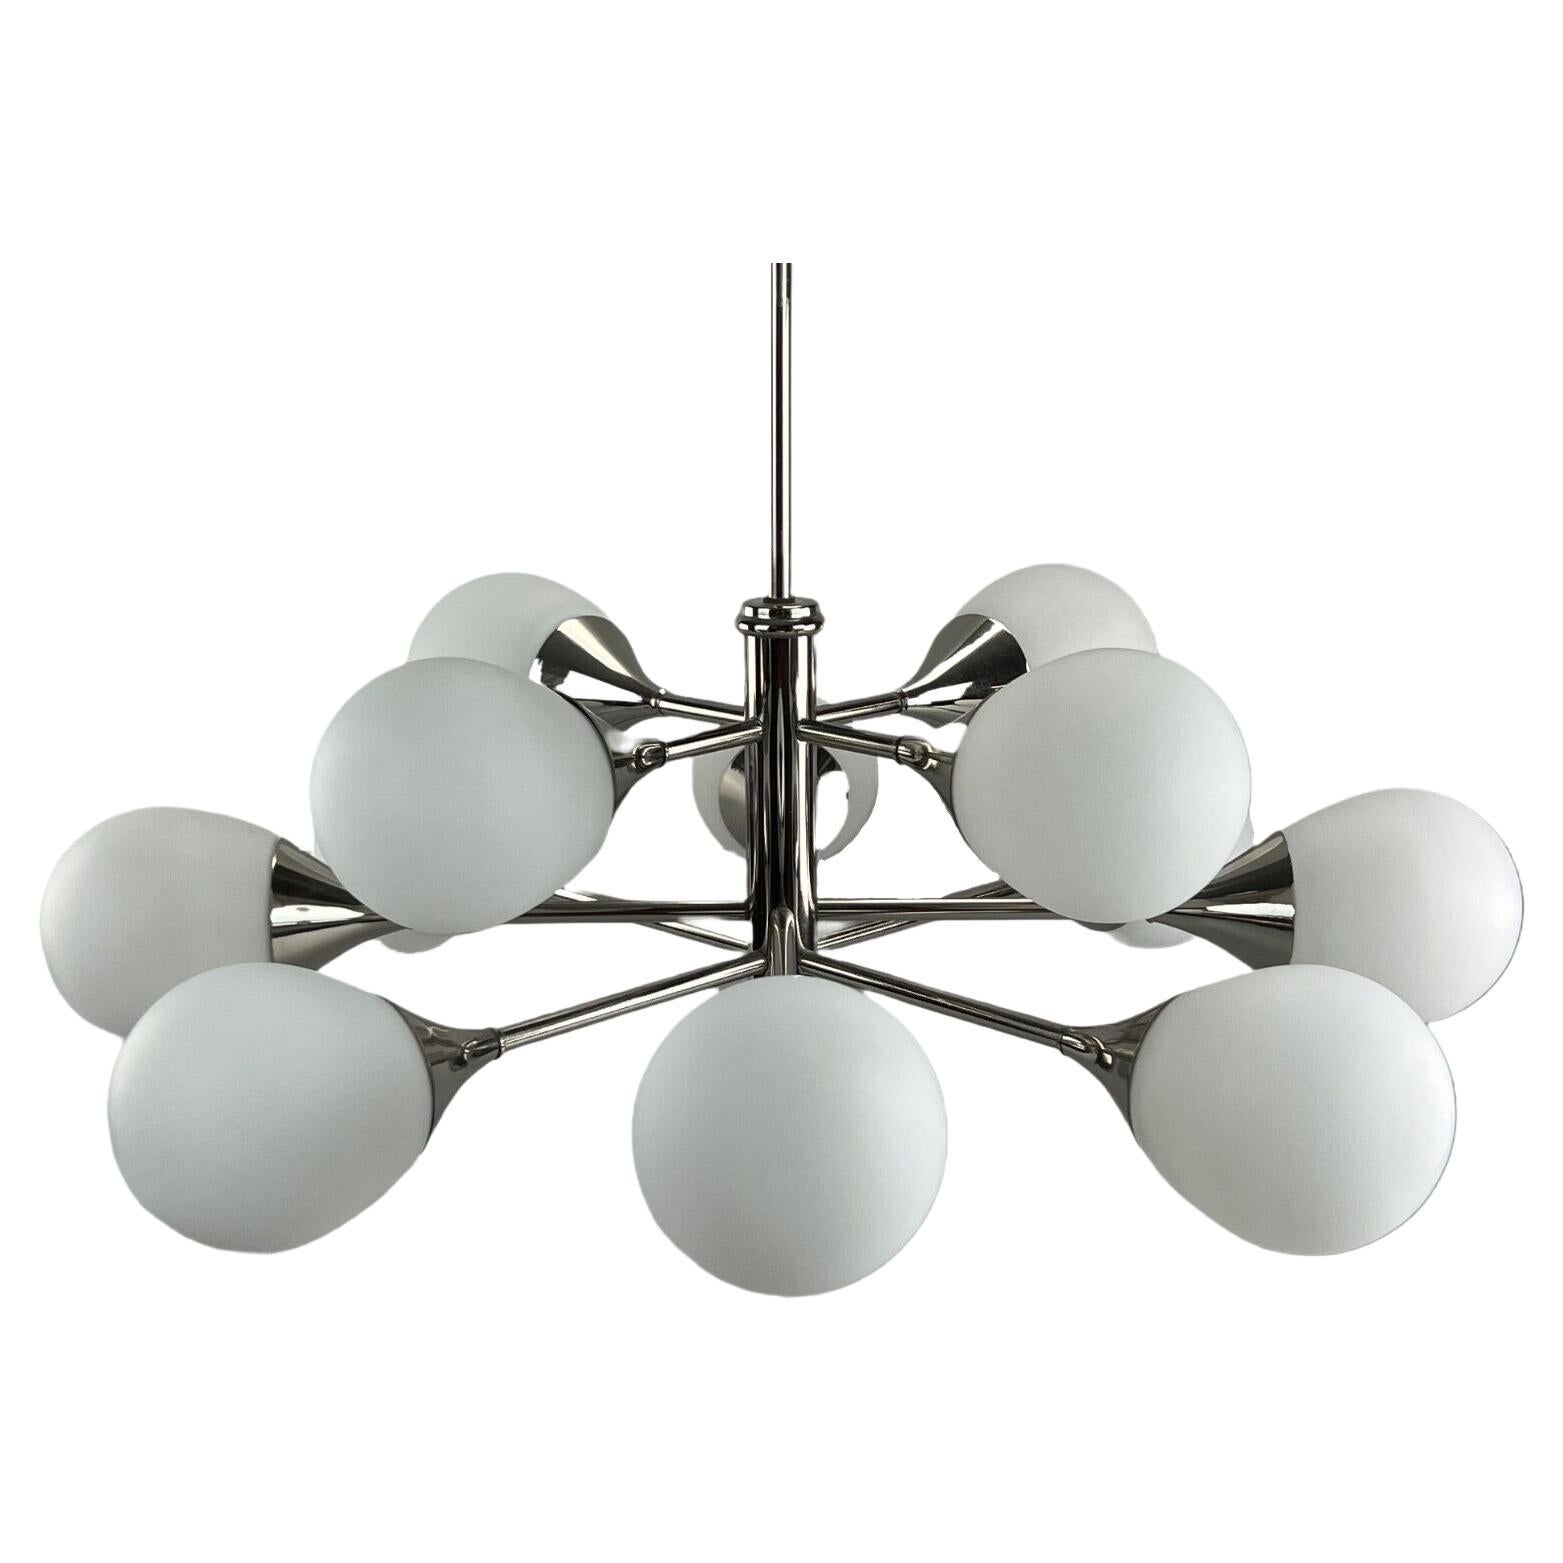 12-Flame Sputnik Chandelier from the 1960s and 1970s, Kaiser Leuchten, Opal Glas